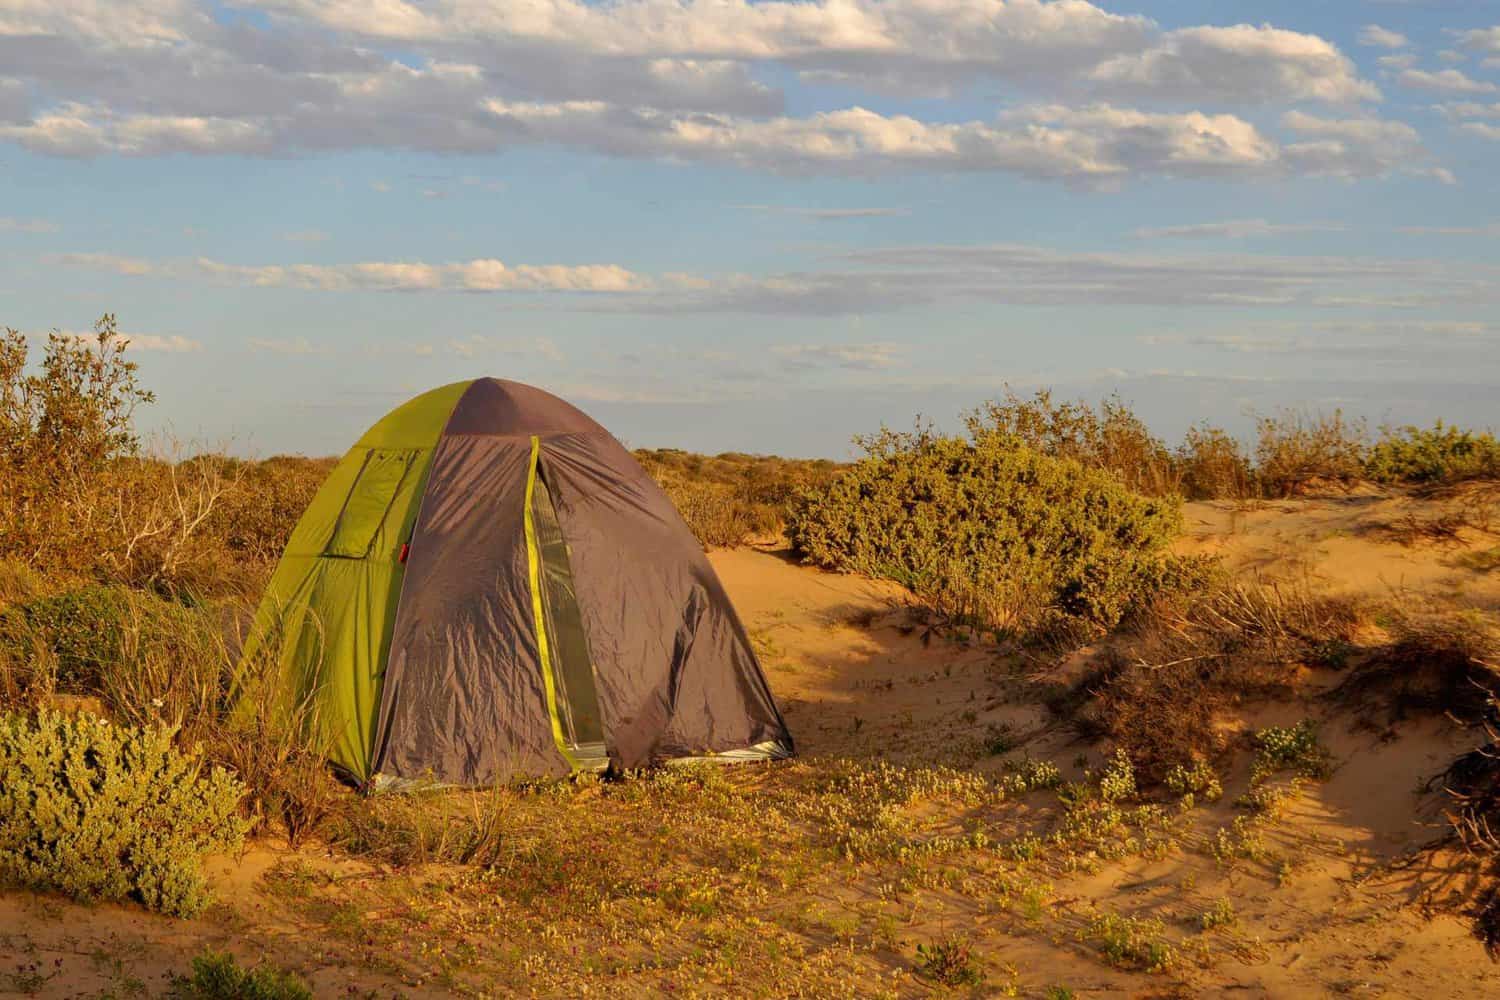 A dome tent pitched amidst the sandy dunes with coastal shrubbery, basking in the golden light of a setting sun. 